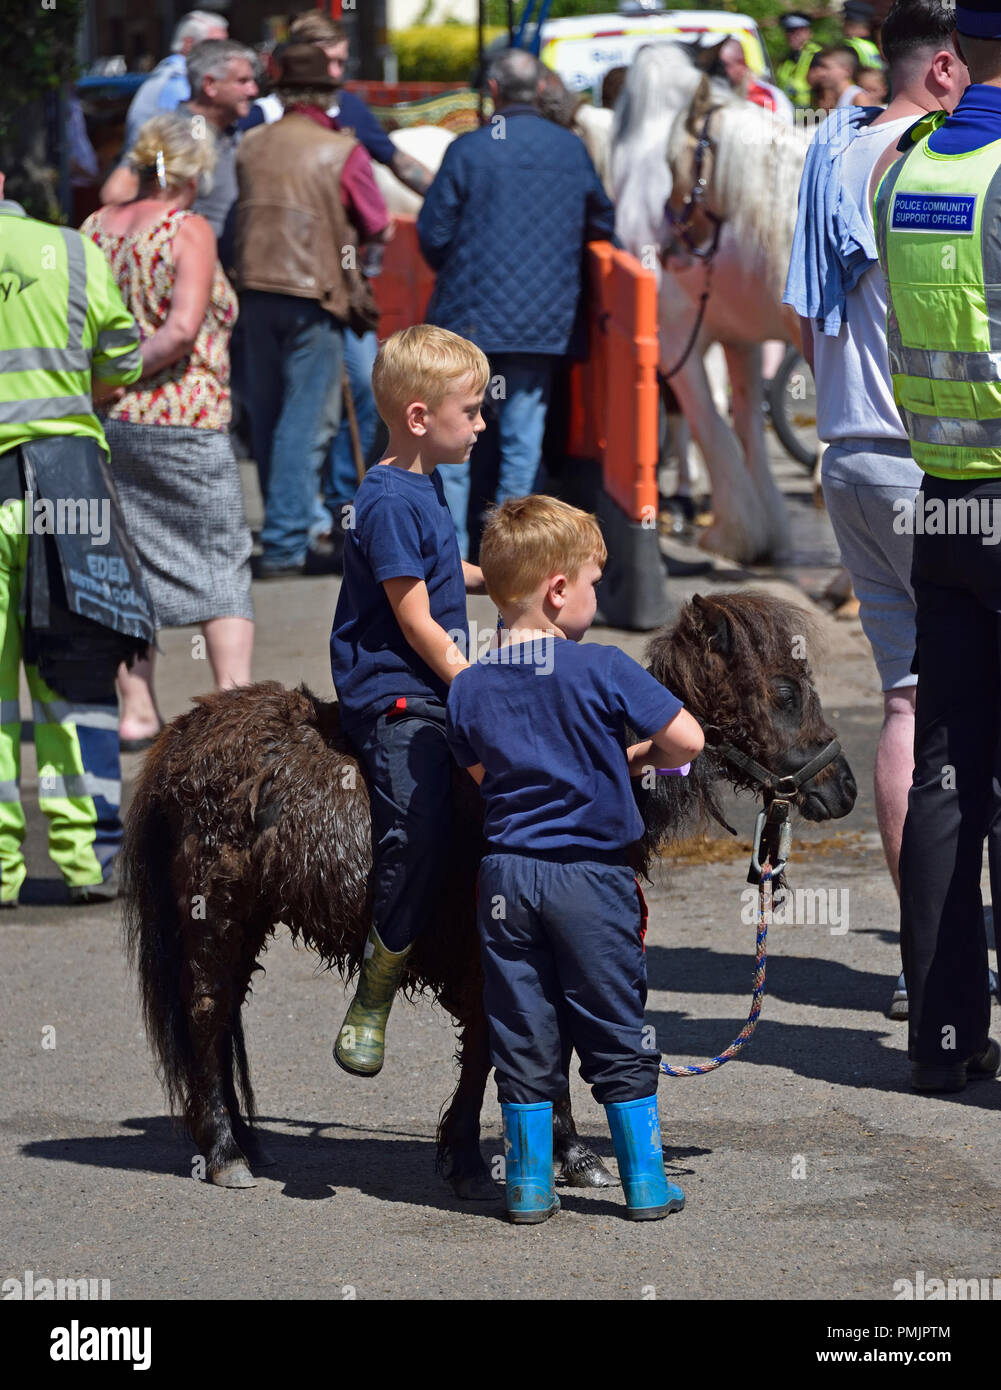 Two small Gypsy Traveller boys with miniature pony. Appleby Horse Fair 2018. The Sands, Appleby-in-Westmorland, Cumbria, England, United Kingdom. Stock Photo